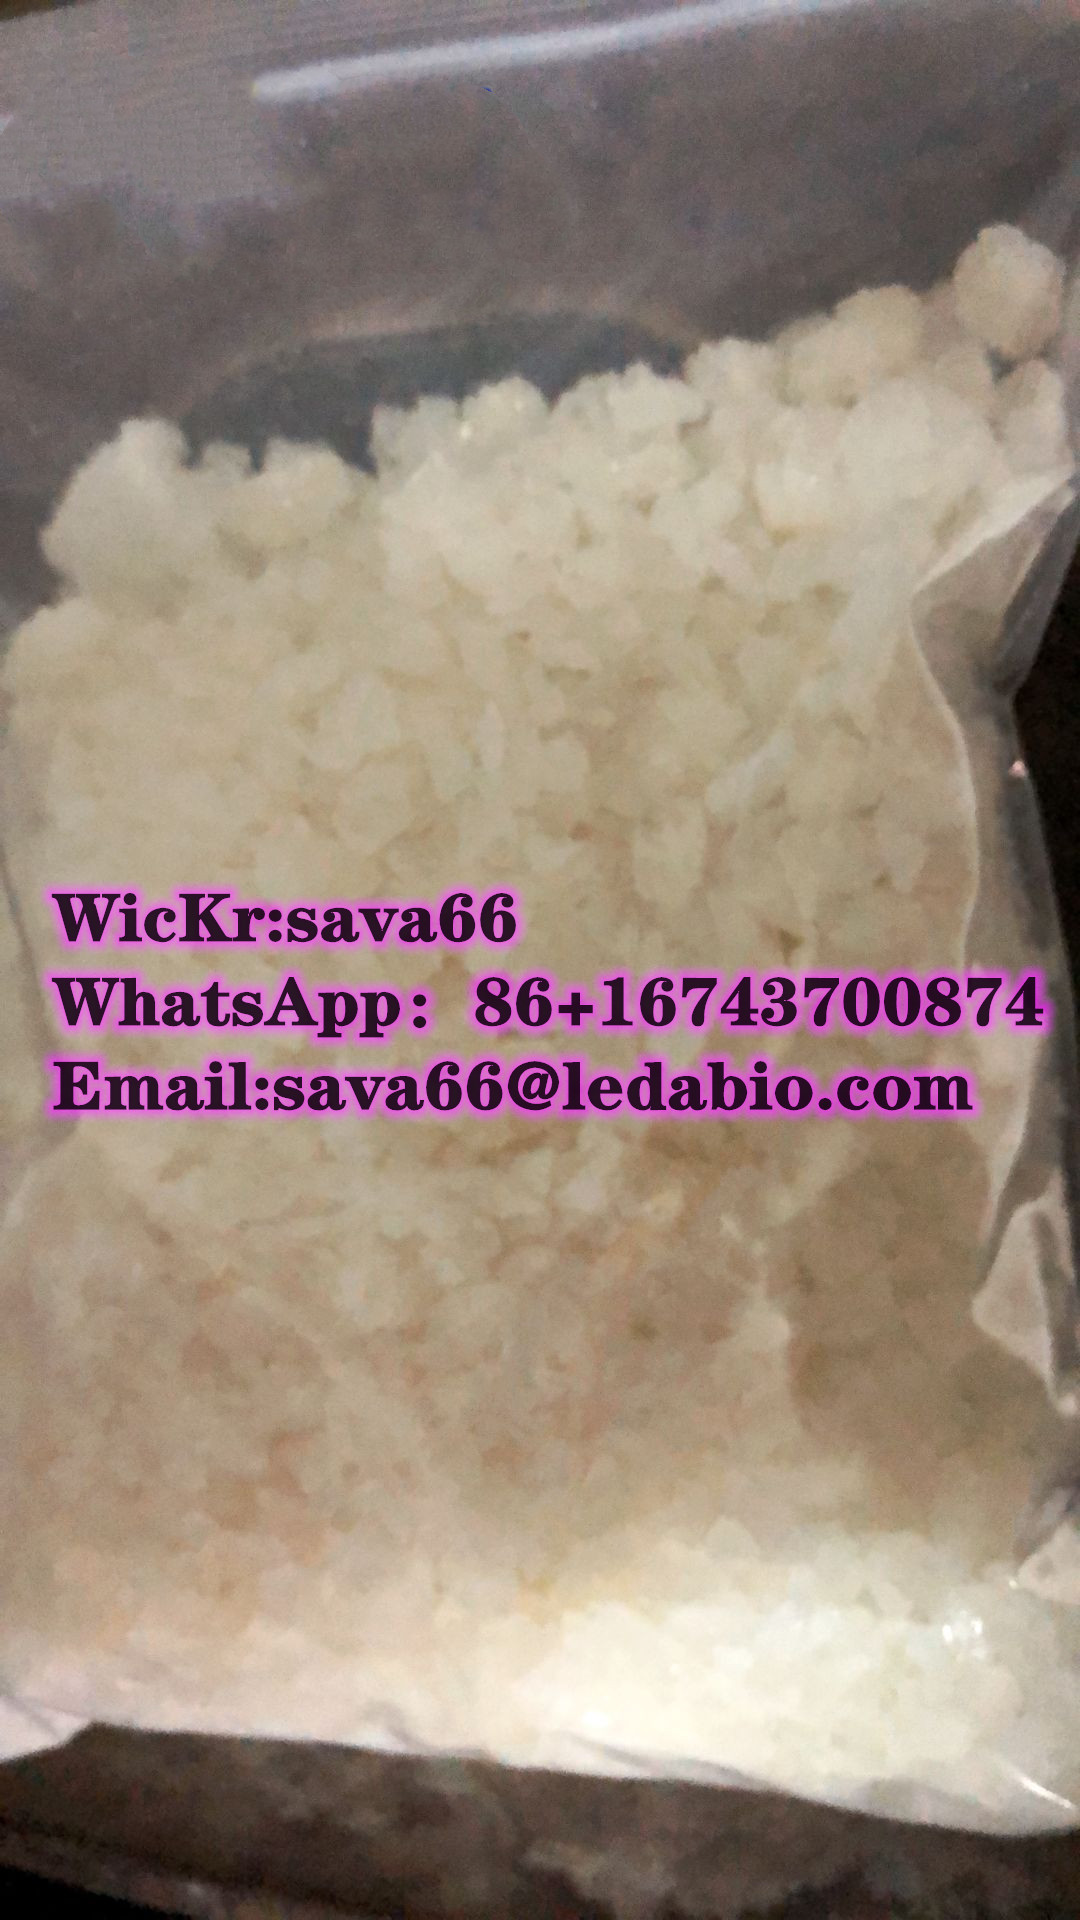 New stimulant & high purity 4FPD,HEP,MDPEP WITH BEST price(WicKr:sava66 WhatsApp?86+1674